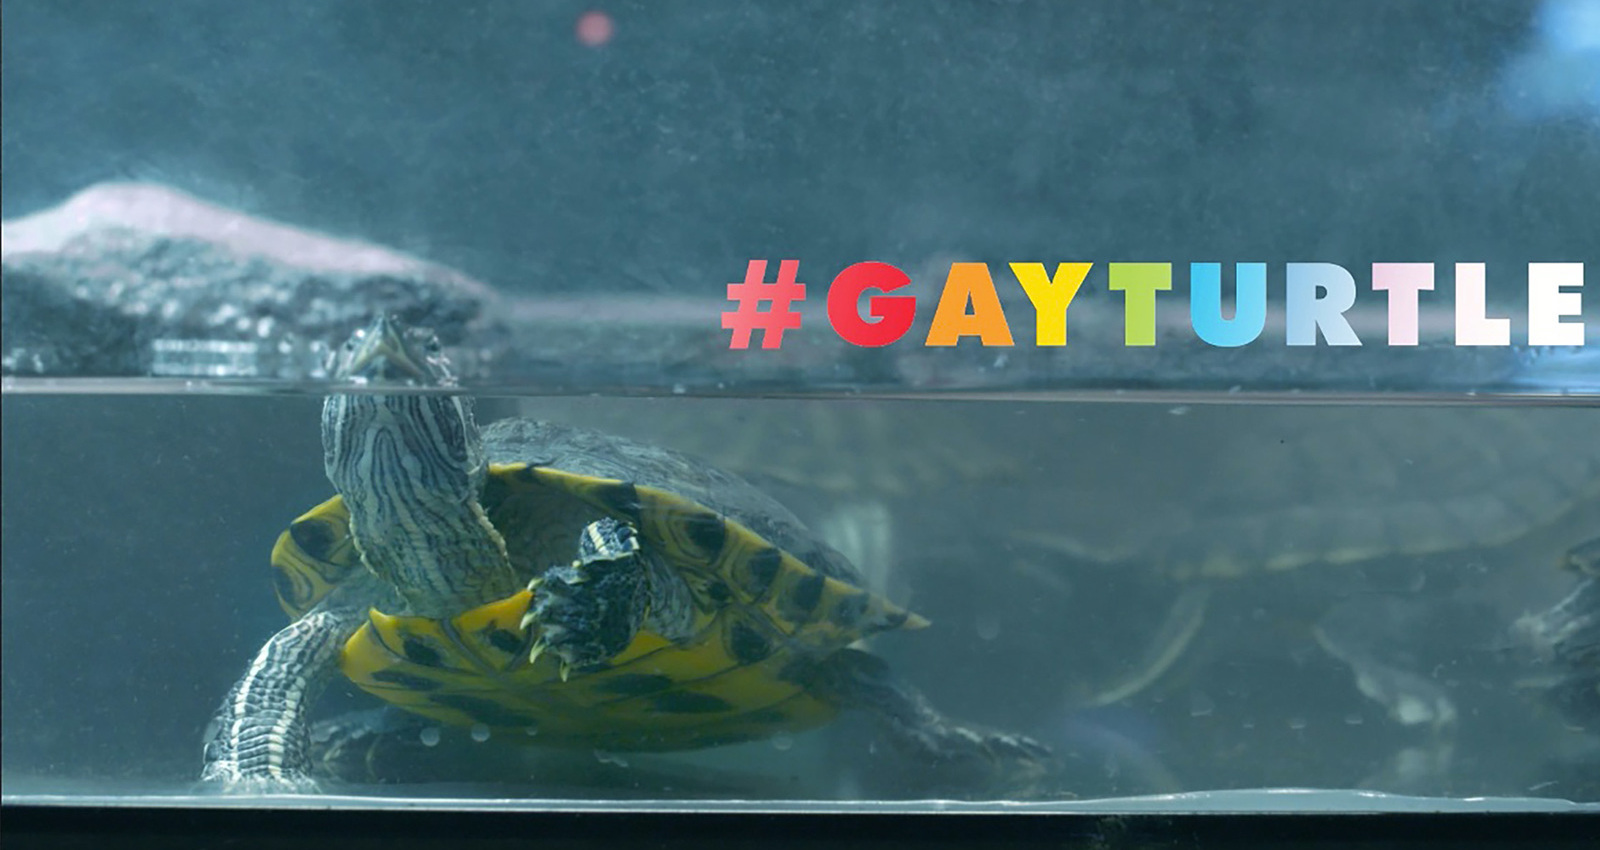 GAY TURTLE